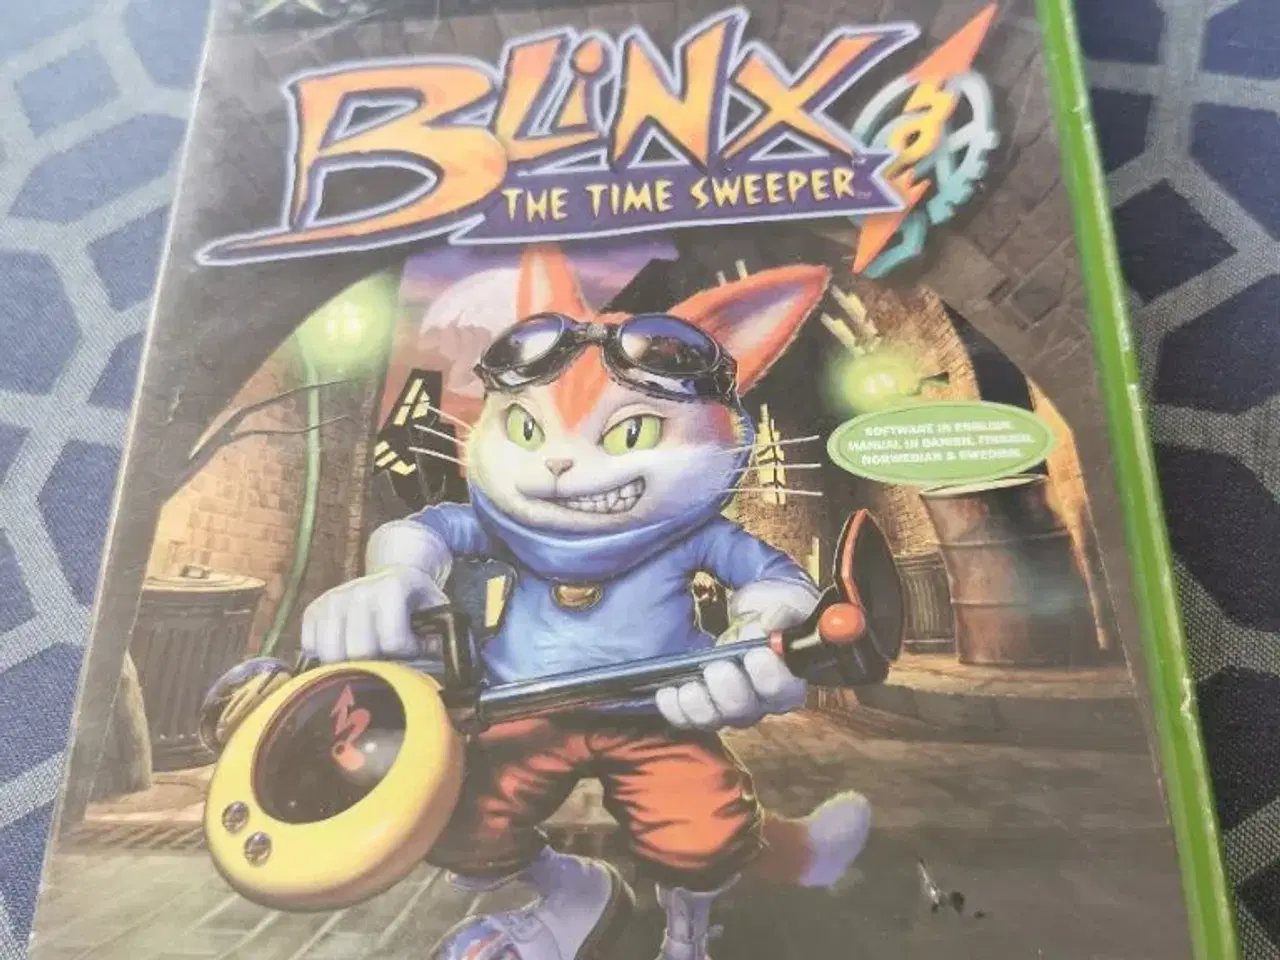 Billede 1 - Blinx the time sweeper!!!